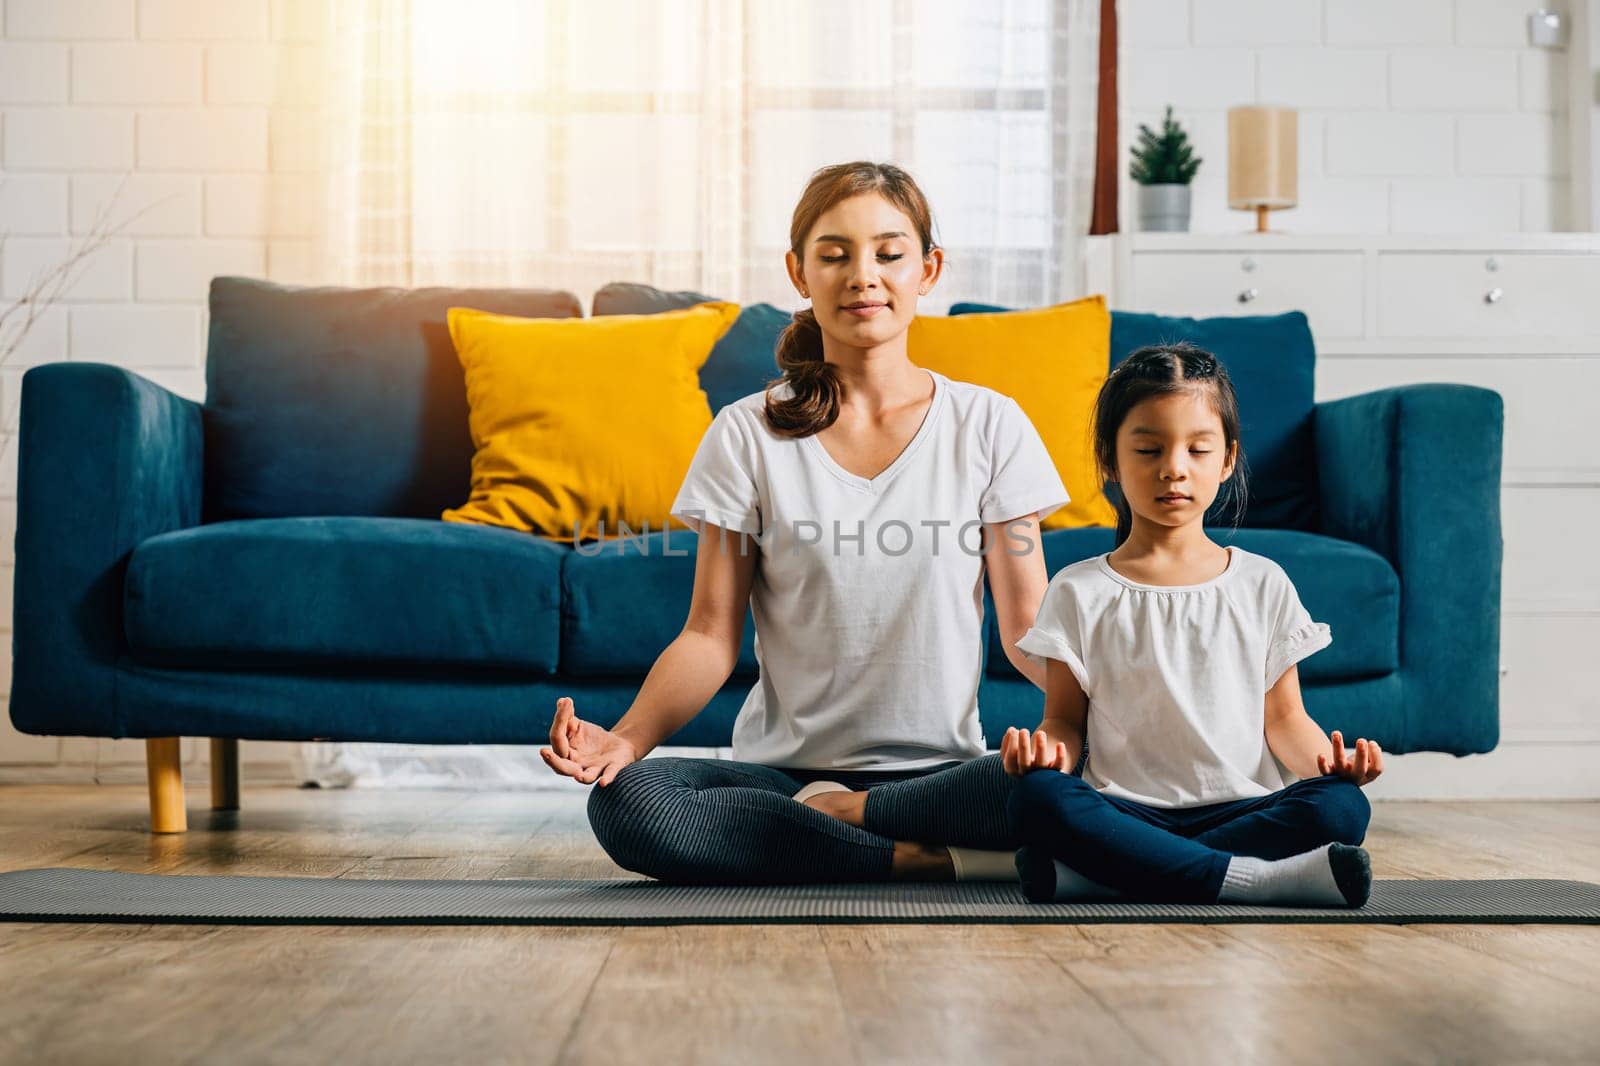 A beautiful young woman and her charming daughter share smiles during their family yoga session at home emphasizing mindfulness and meditation in lotus position creating happiness and togetherness.